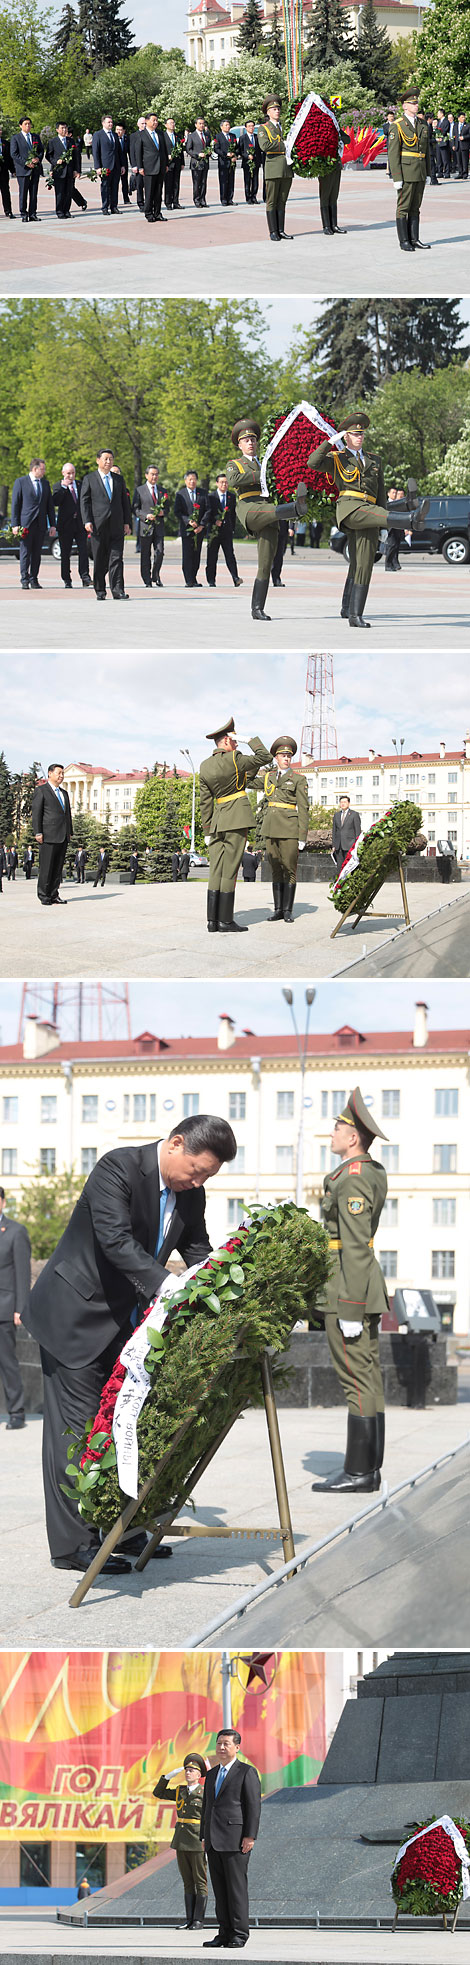 Xi Jinping laid a wreath at the Victory Monument in Minsk